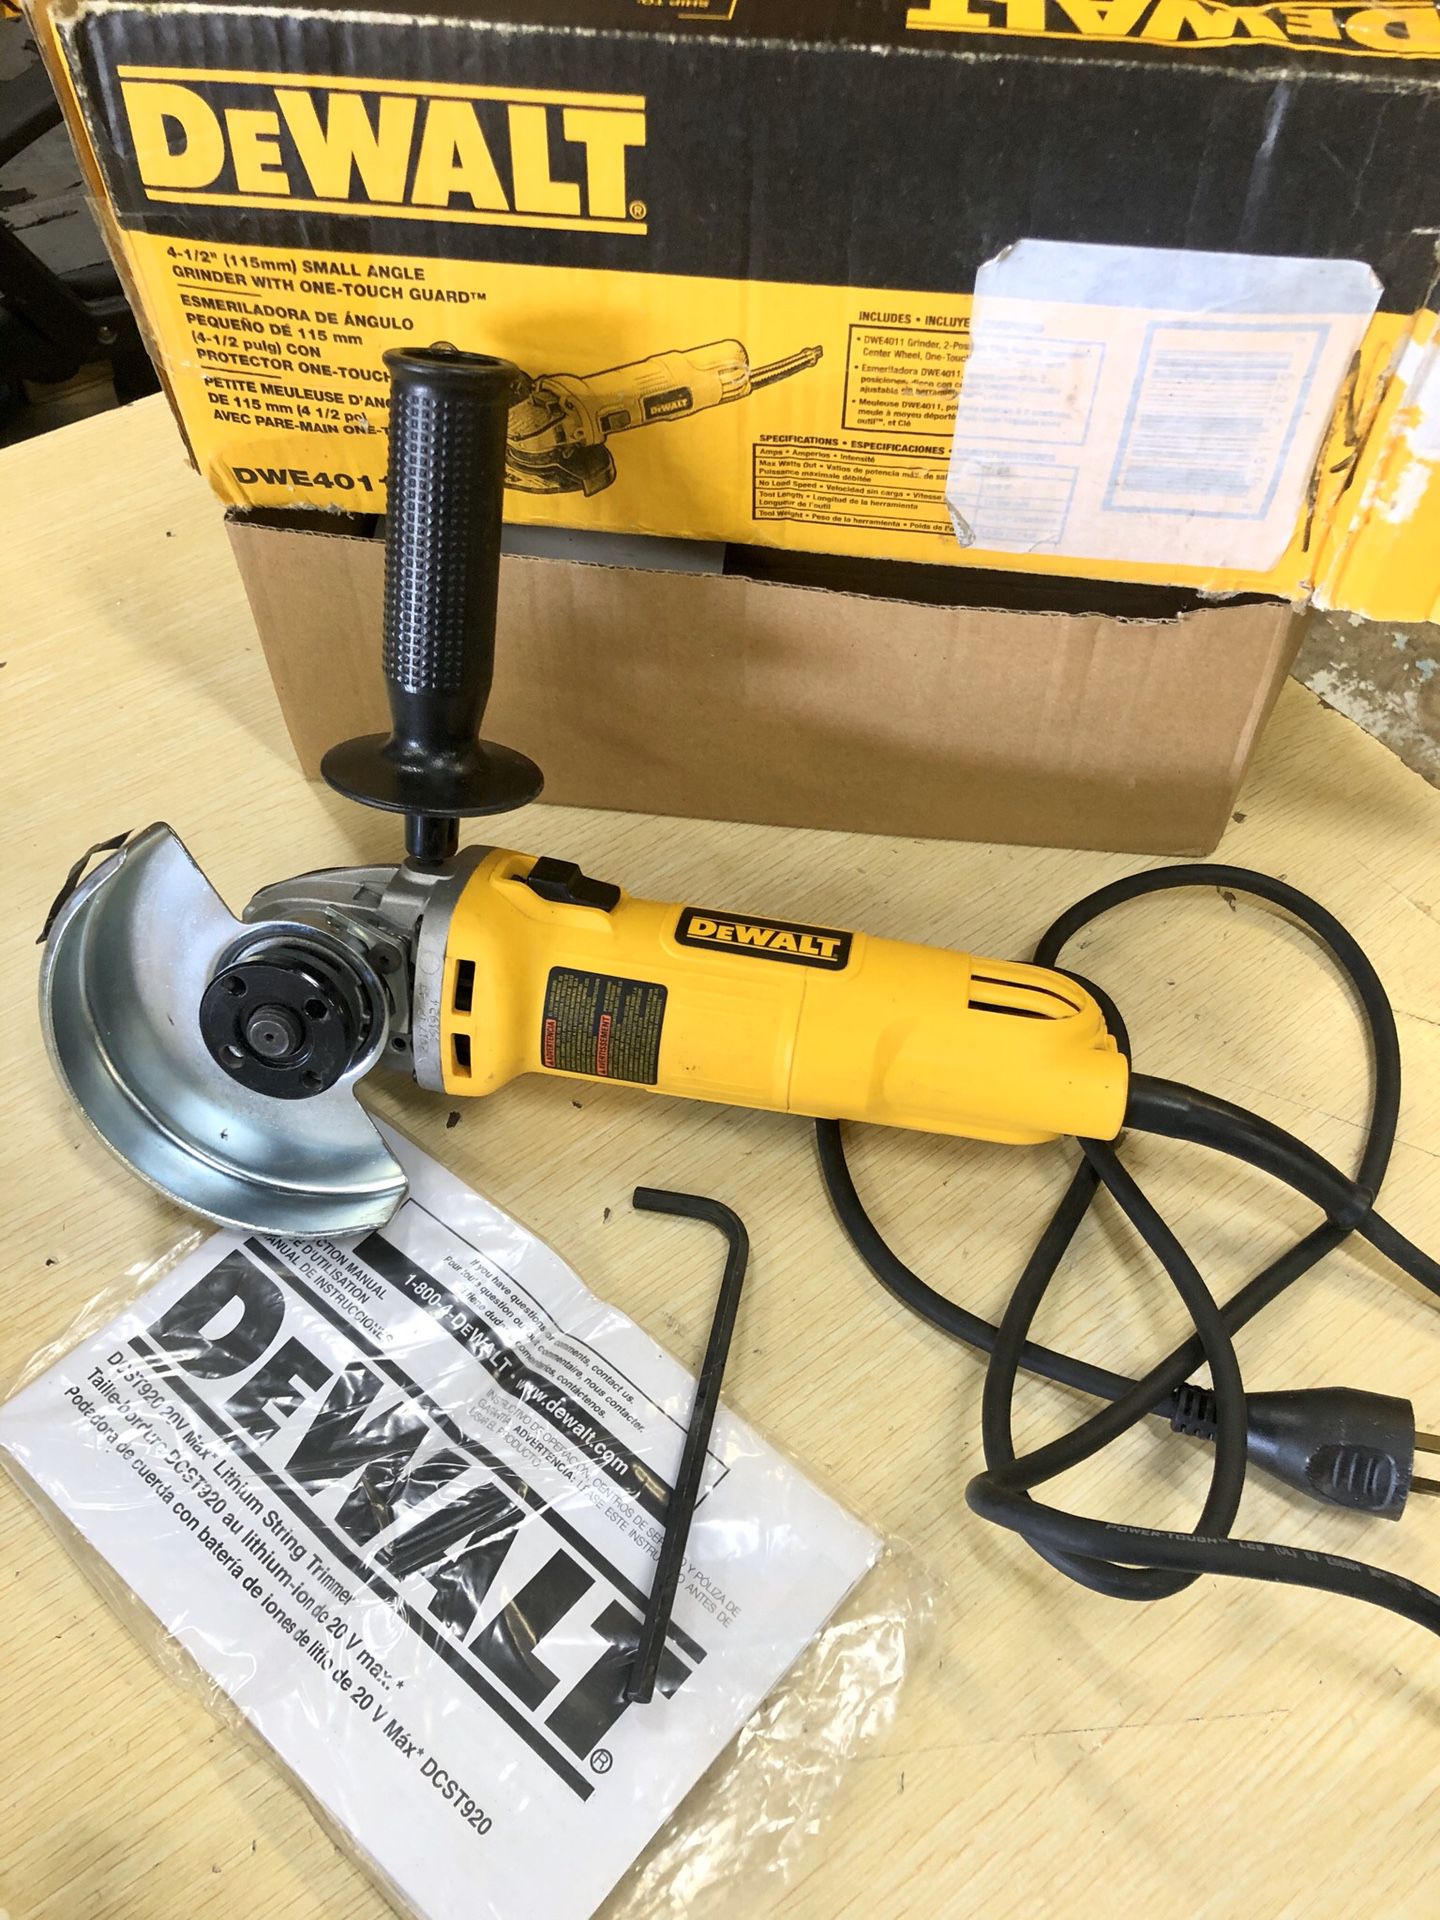 DEWALT 7 Amp 4-1/2 in. Small Angle Grinder with 1-Touch Guard